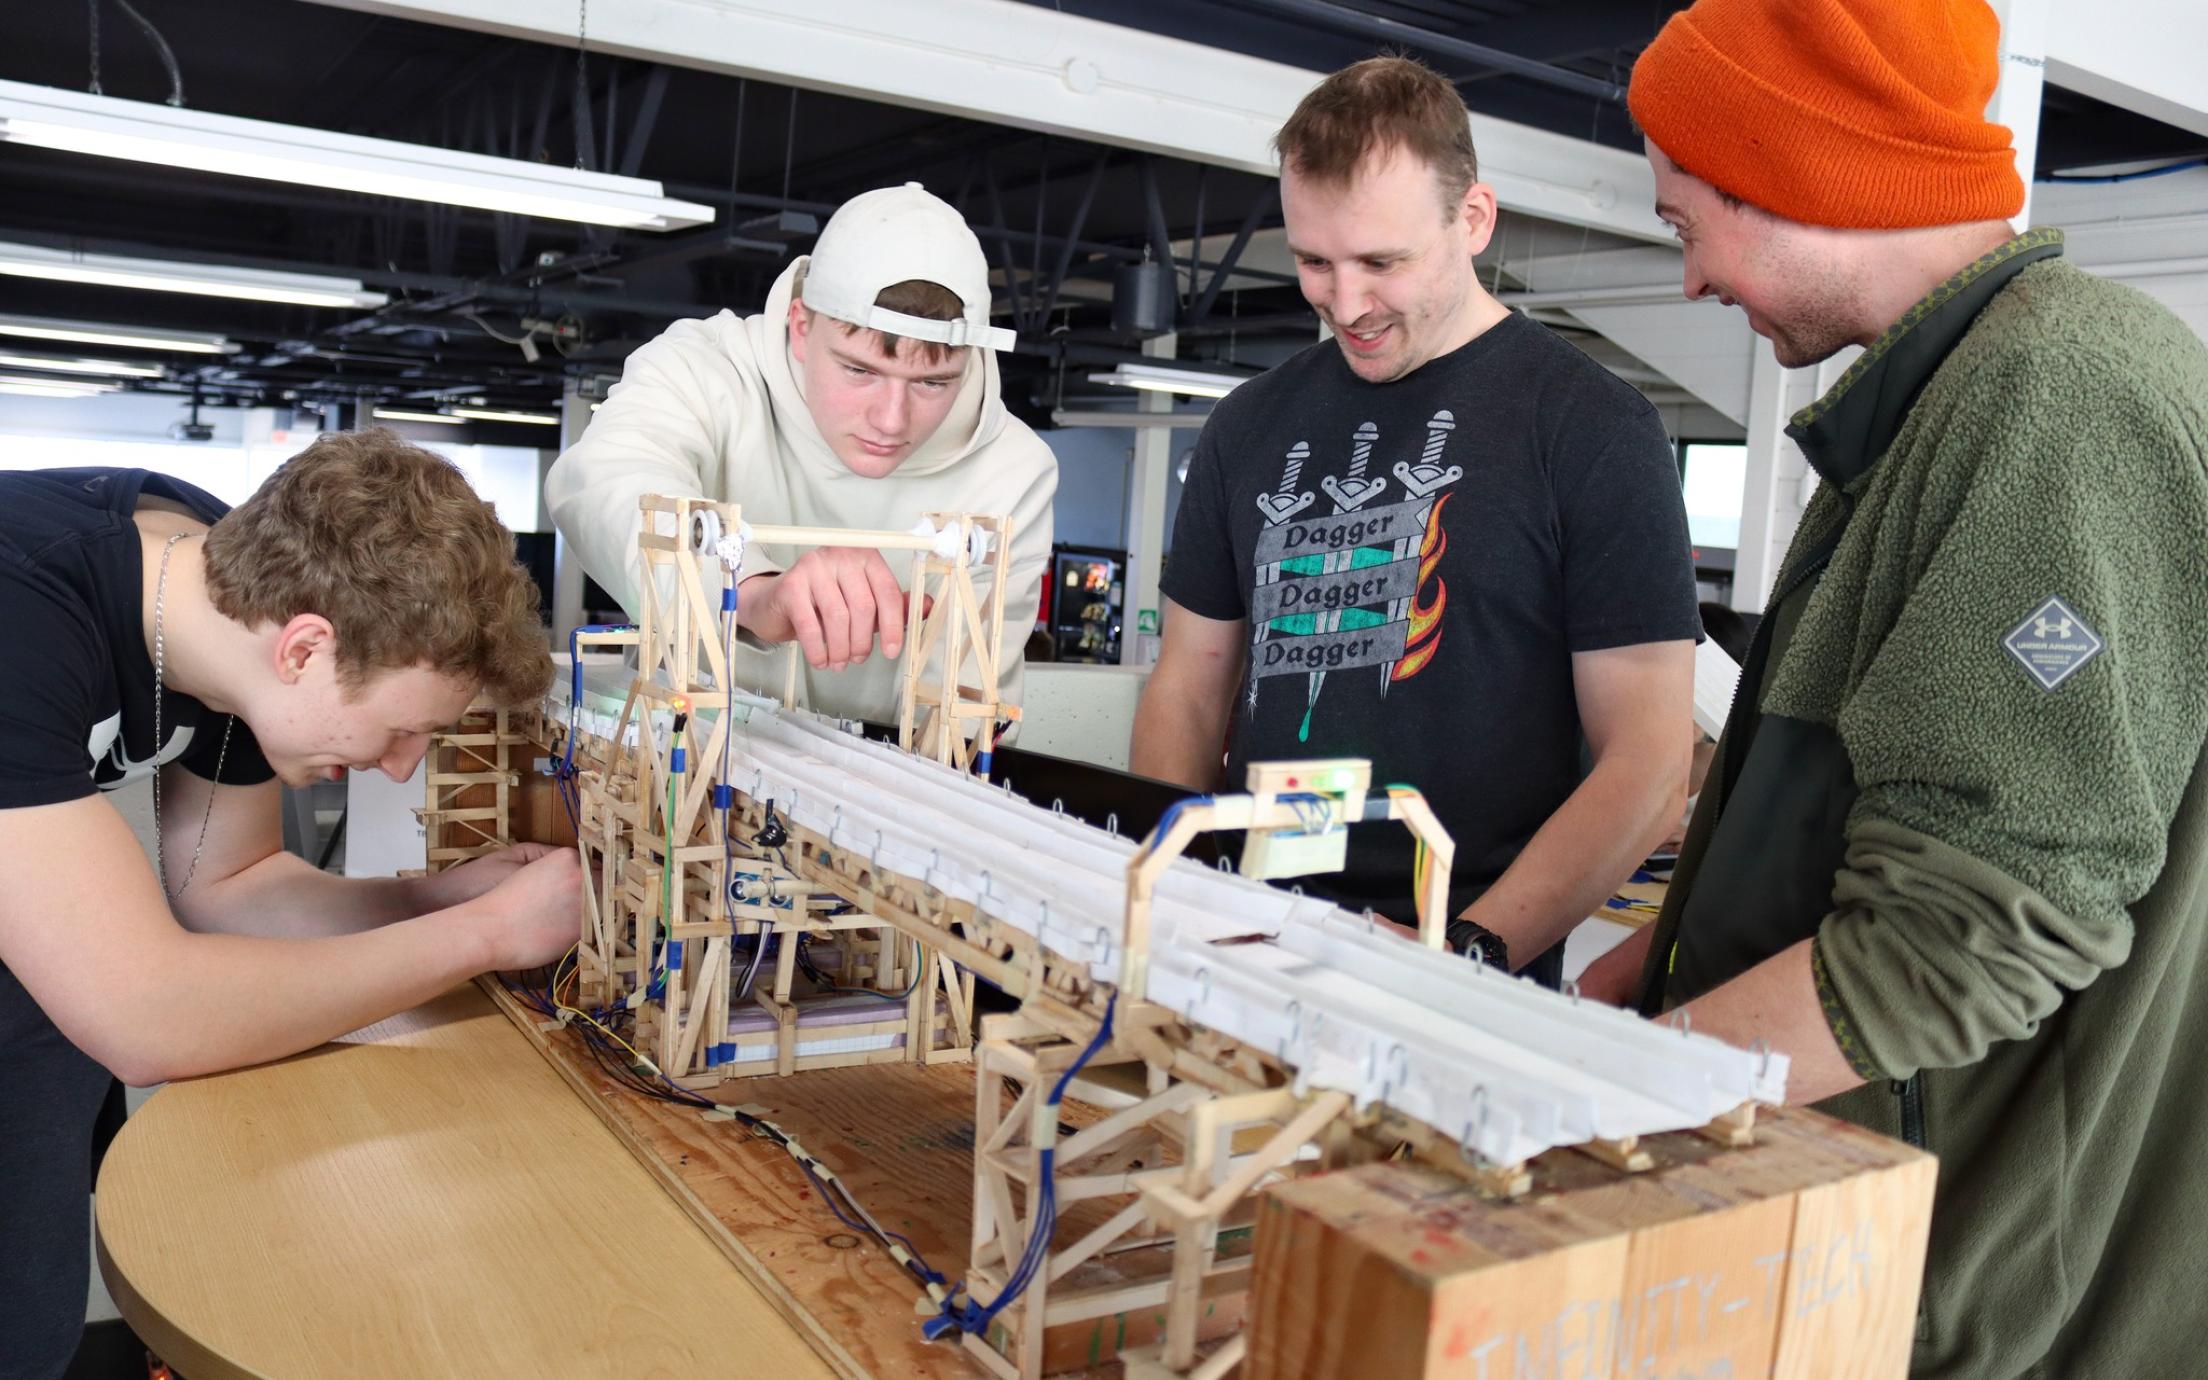 Four students bend over a bridge structure together